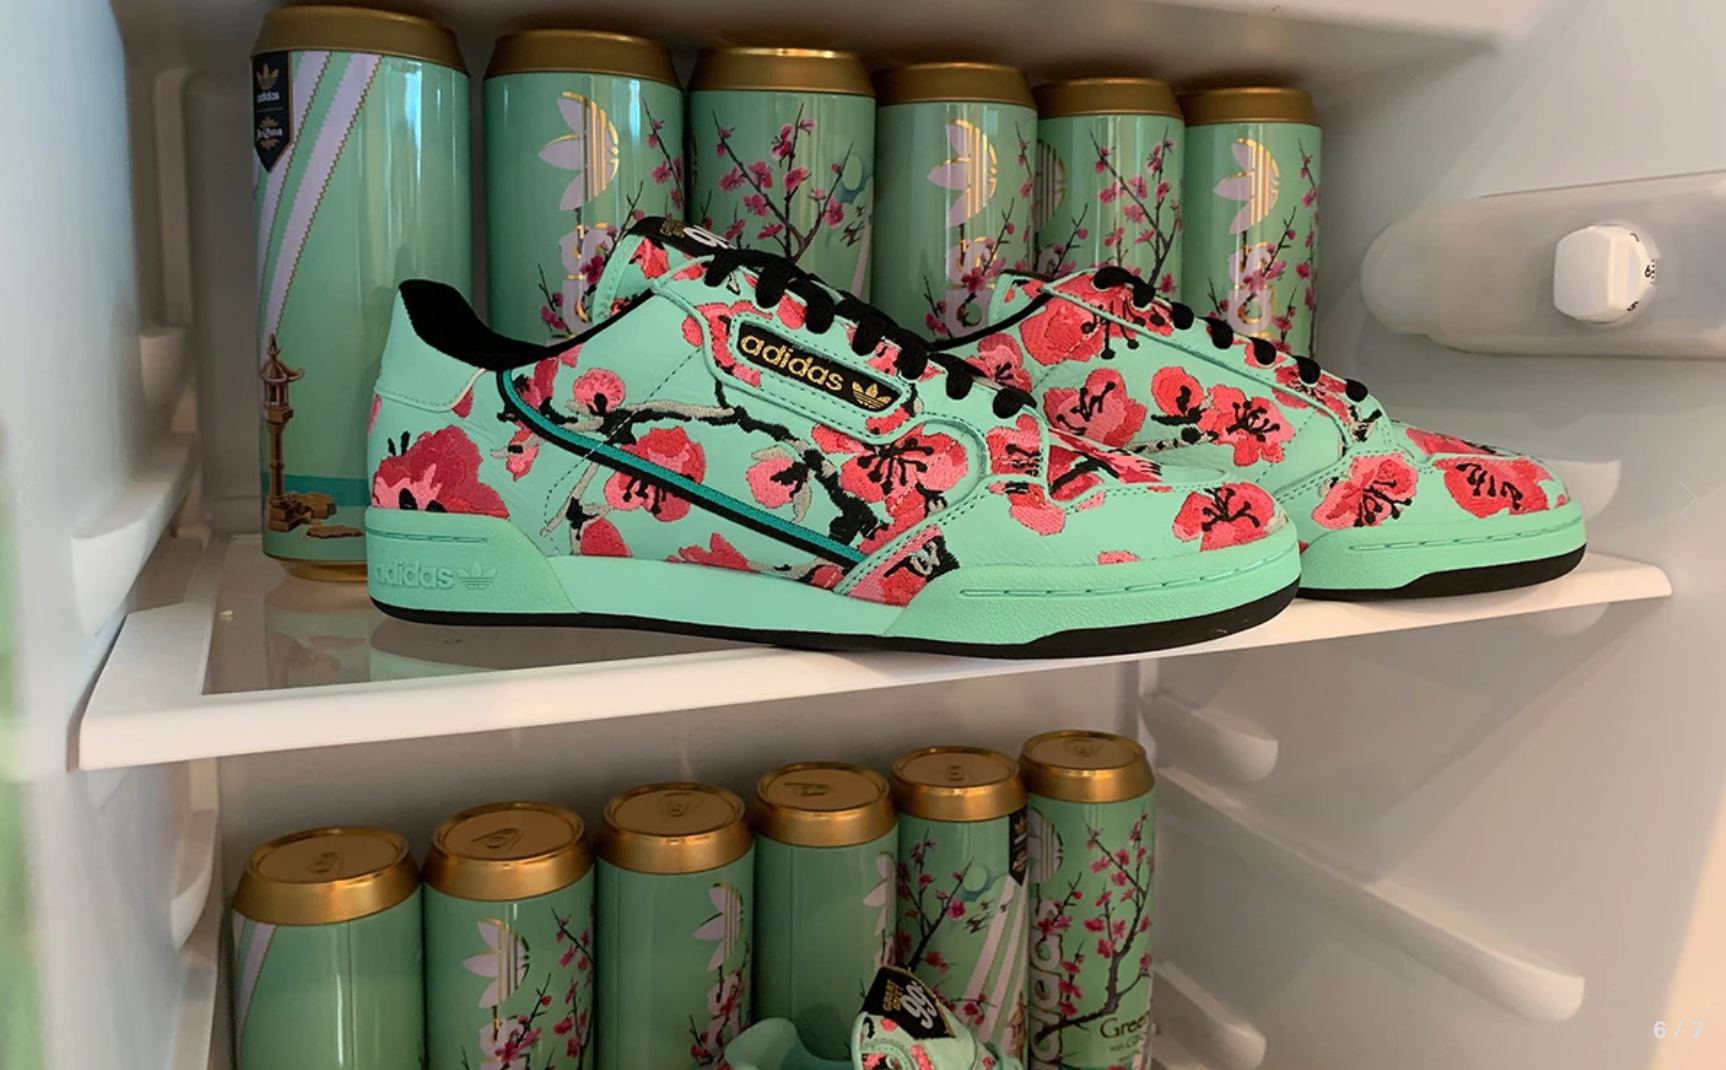 AriZona Iced Tea for 99-Cent Sneakers 